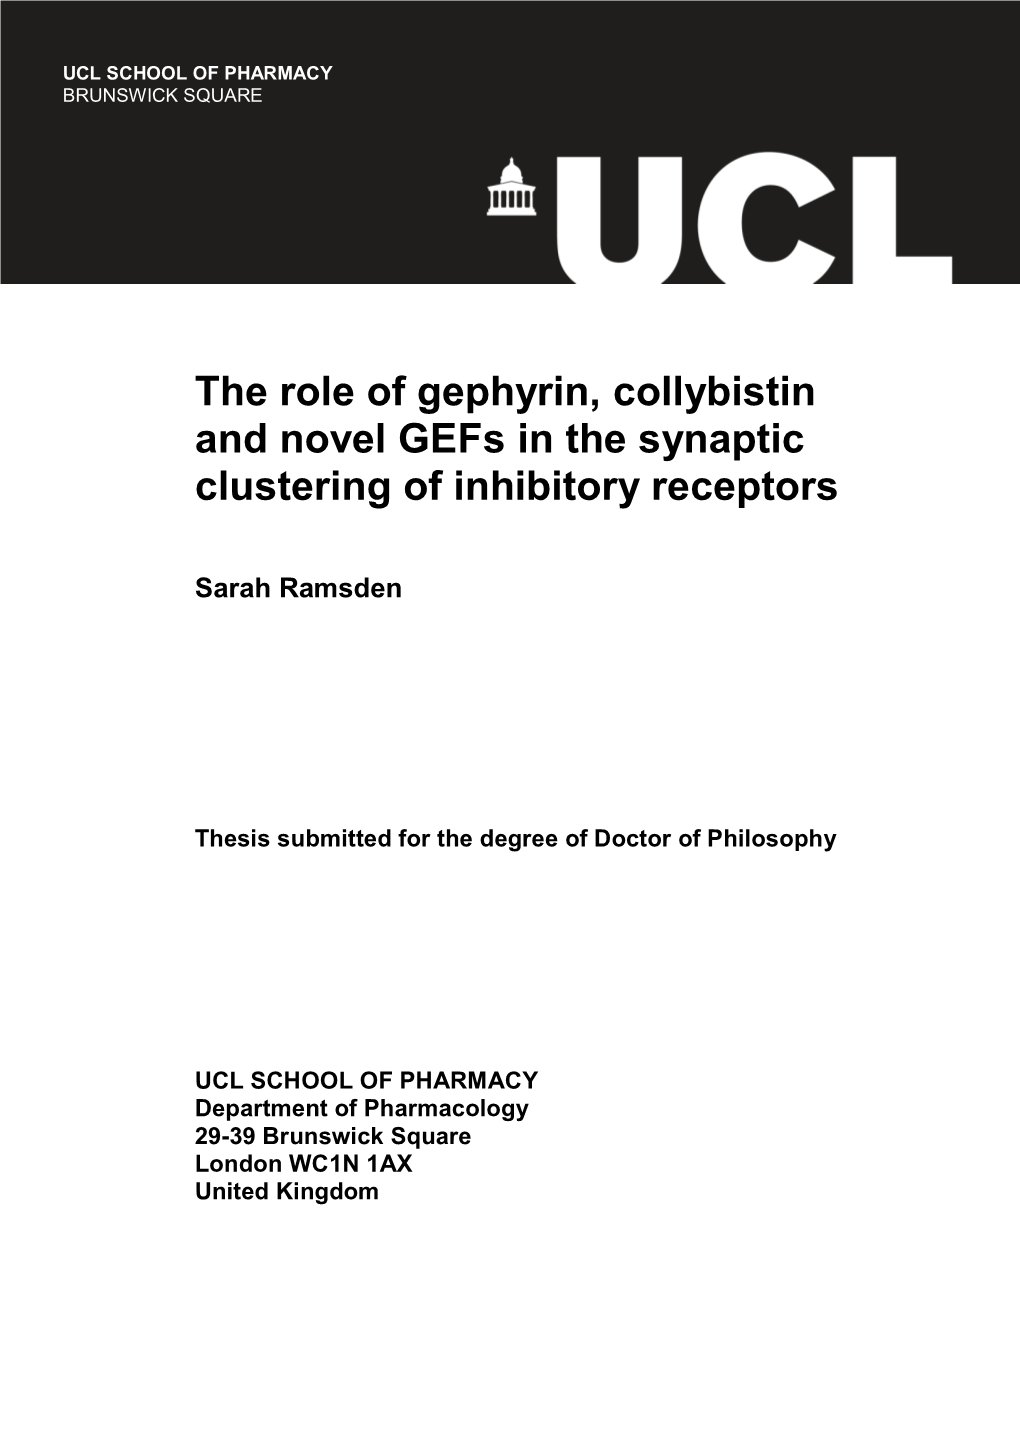 The Role of Gephyrin, Collybistin and Novel Gefs in the Synaptic Clustering of Inhibitory Receptors